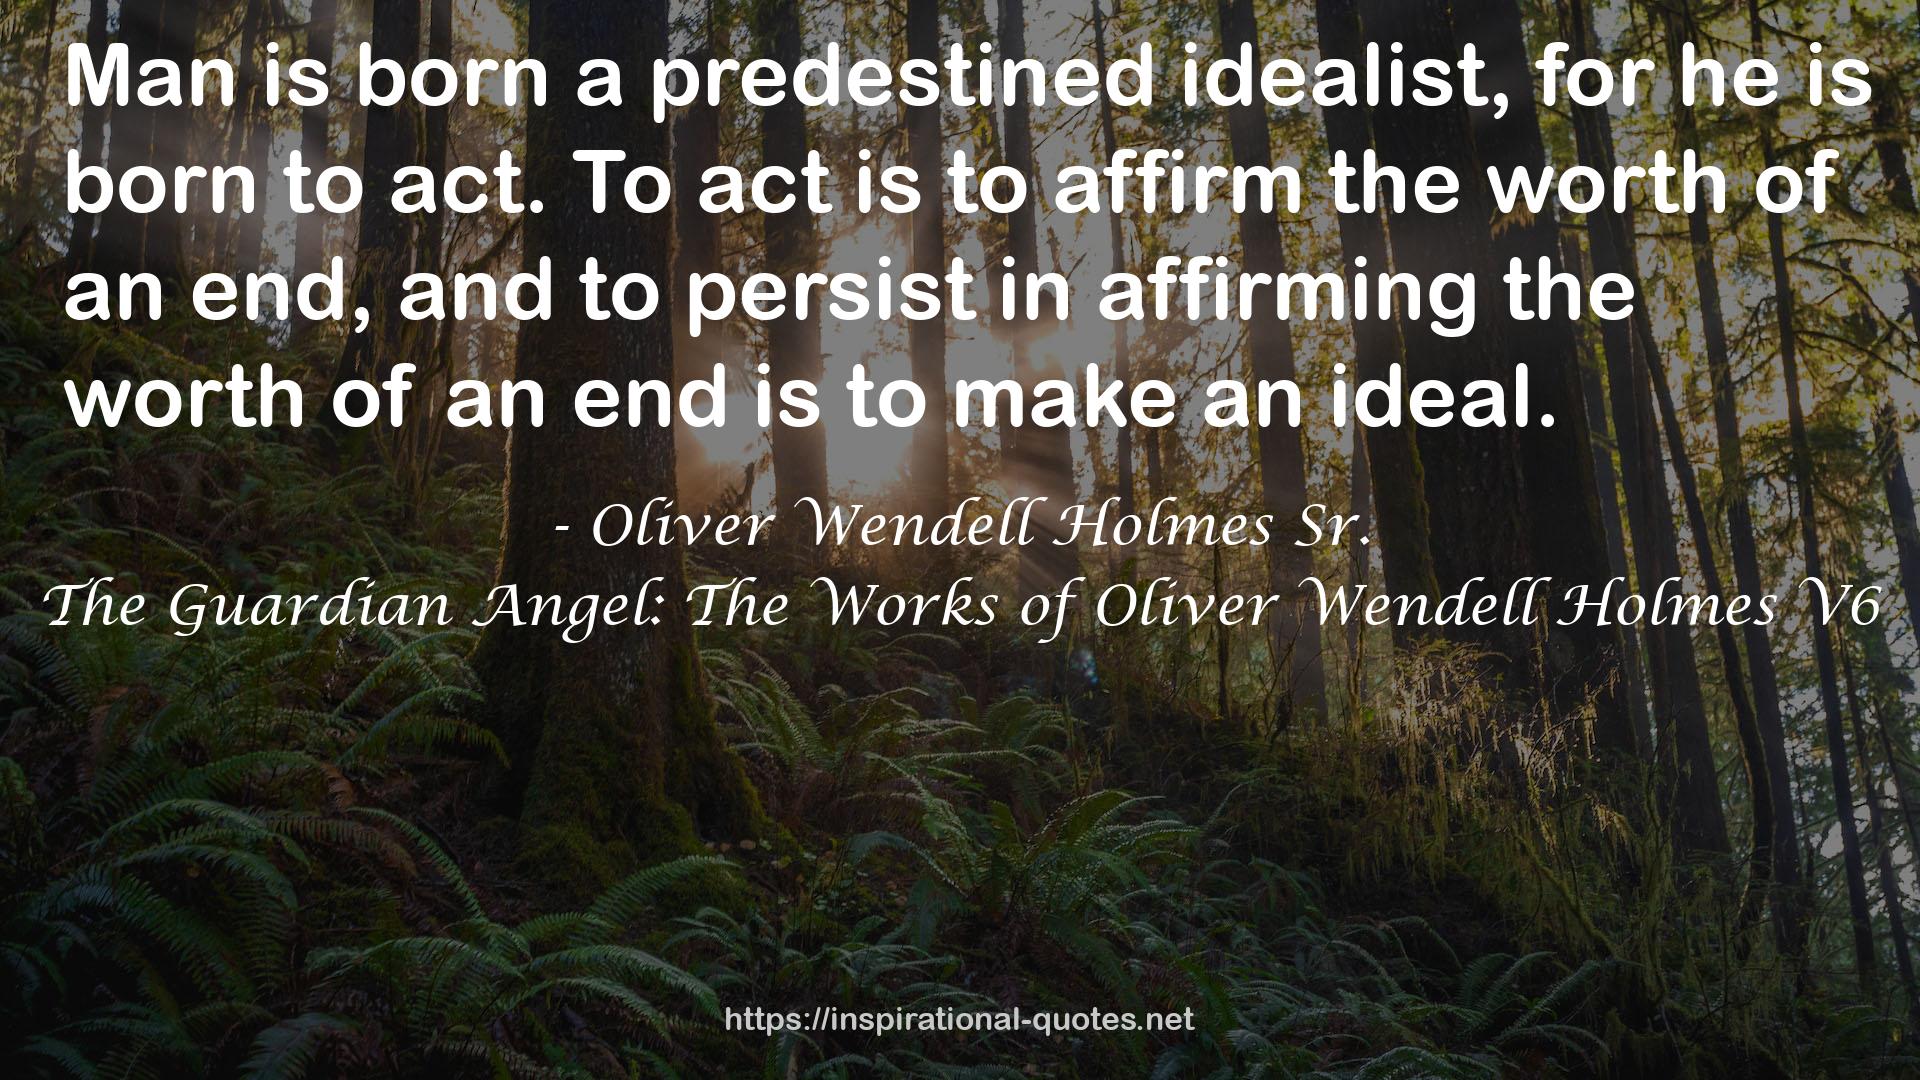 The Guardian Angel: The Works of Oliver Wendell Holmes V6 QUOTES